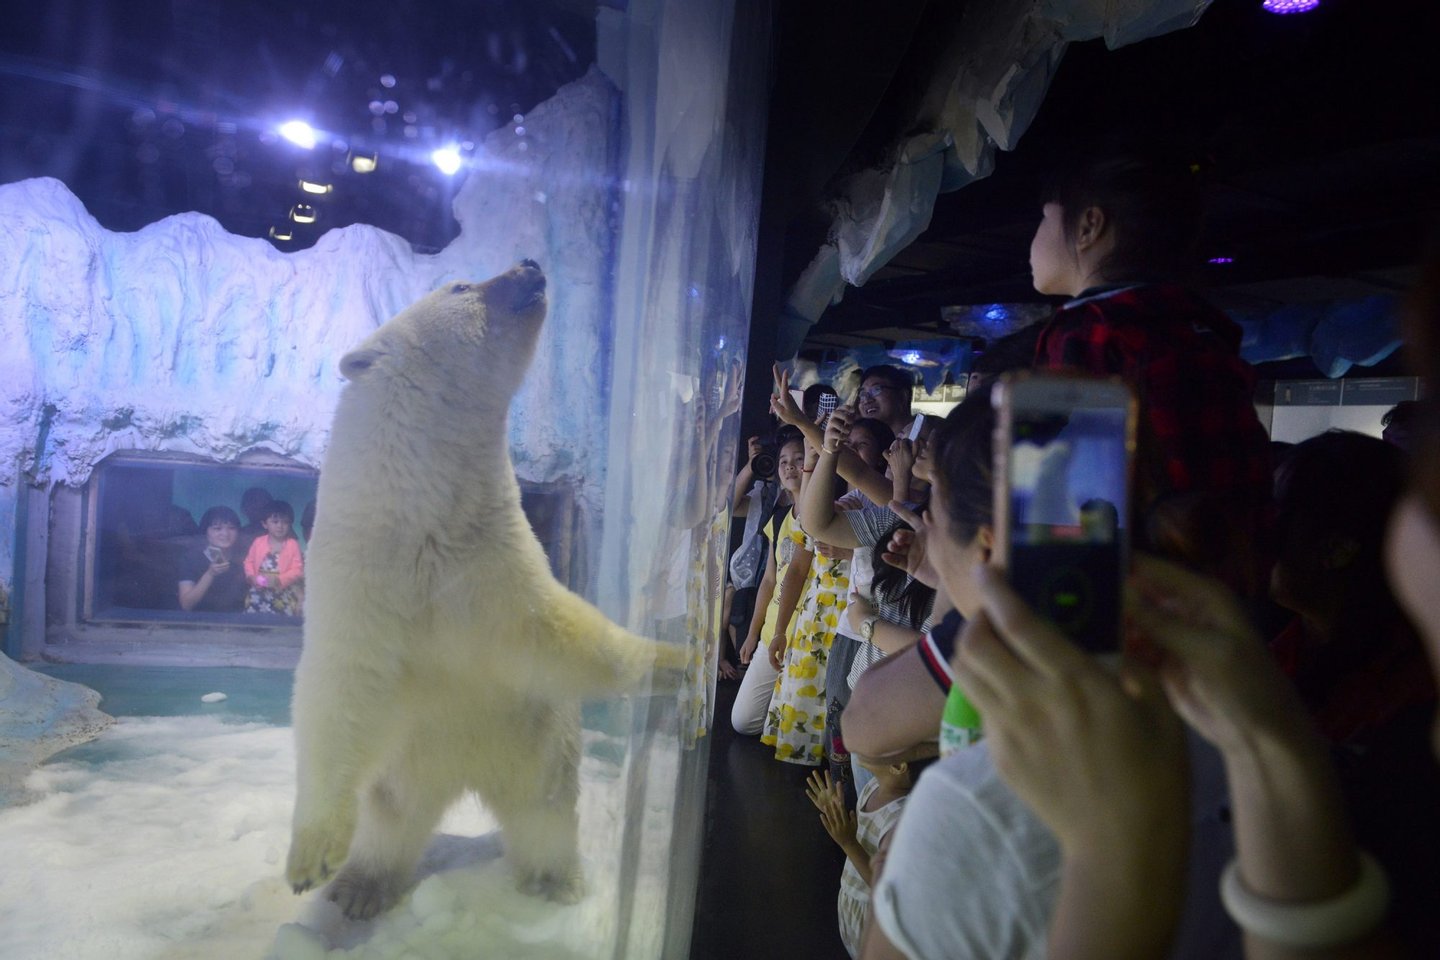 TOPSHOT - This picture taken on July 24, 2016 shows visitors taking photos of a polar bear inside its enclosure at the Grandview Mall Aquarium in the southern Chinese city of Guangzhou. A Chinese aquarium holding a forlorn-looking polar bear named Pizza said on September 20 it has "no need" for foreign interference, after activists offered to move the animal to a British zoo. / AFP / - (Photo credit should read -/AFP/Getty Images)